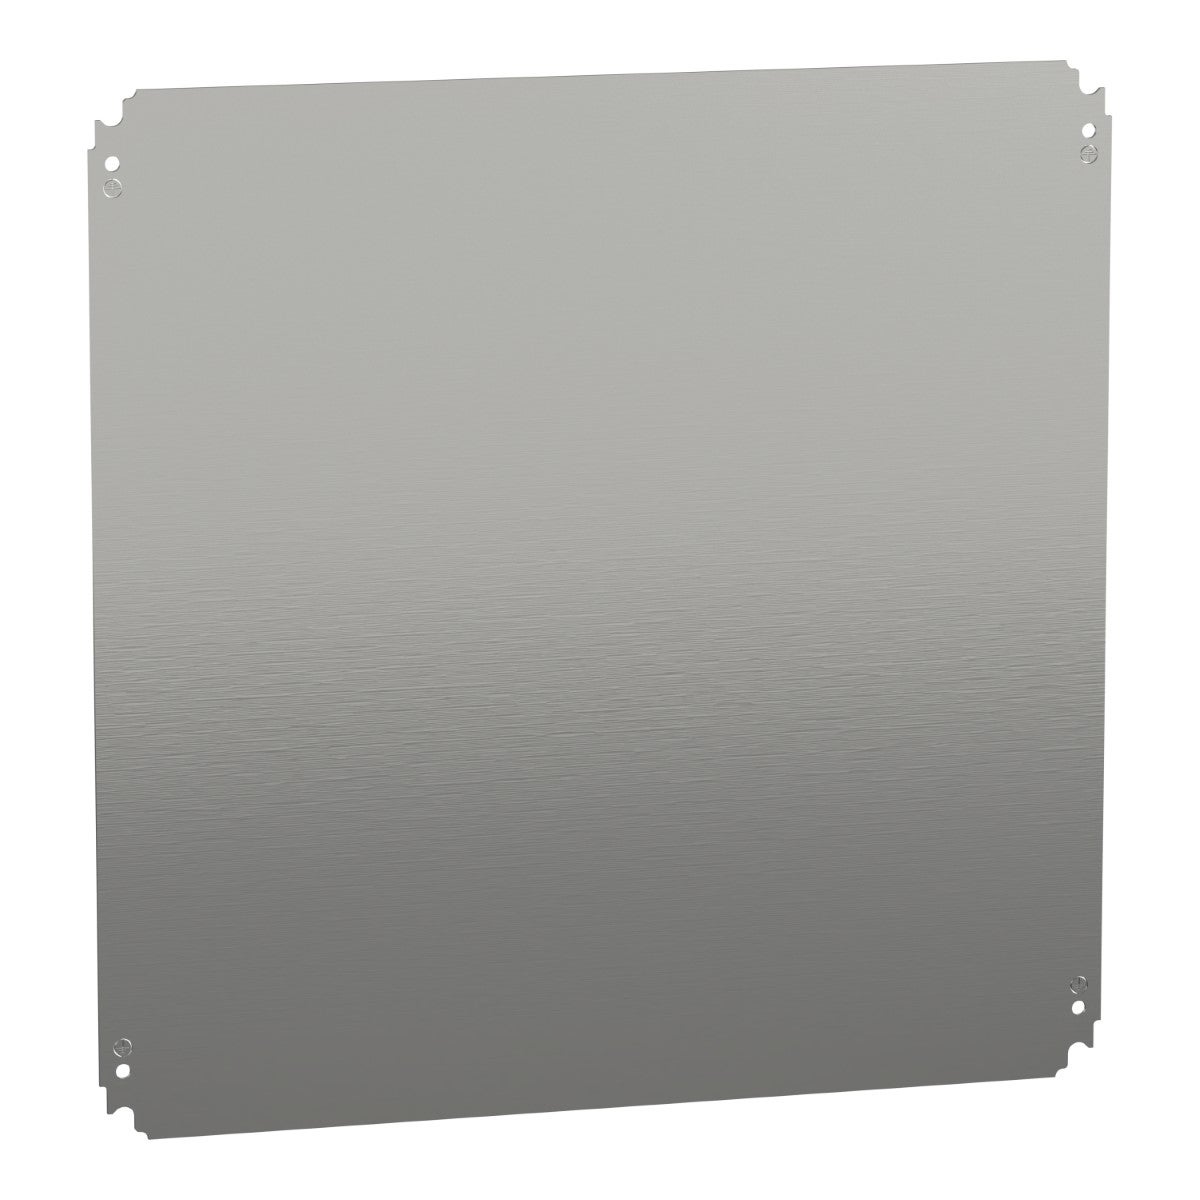 Plain mounting plate H600xW600mm made of galvanised sheet steel